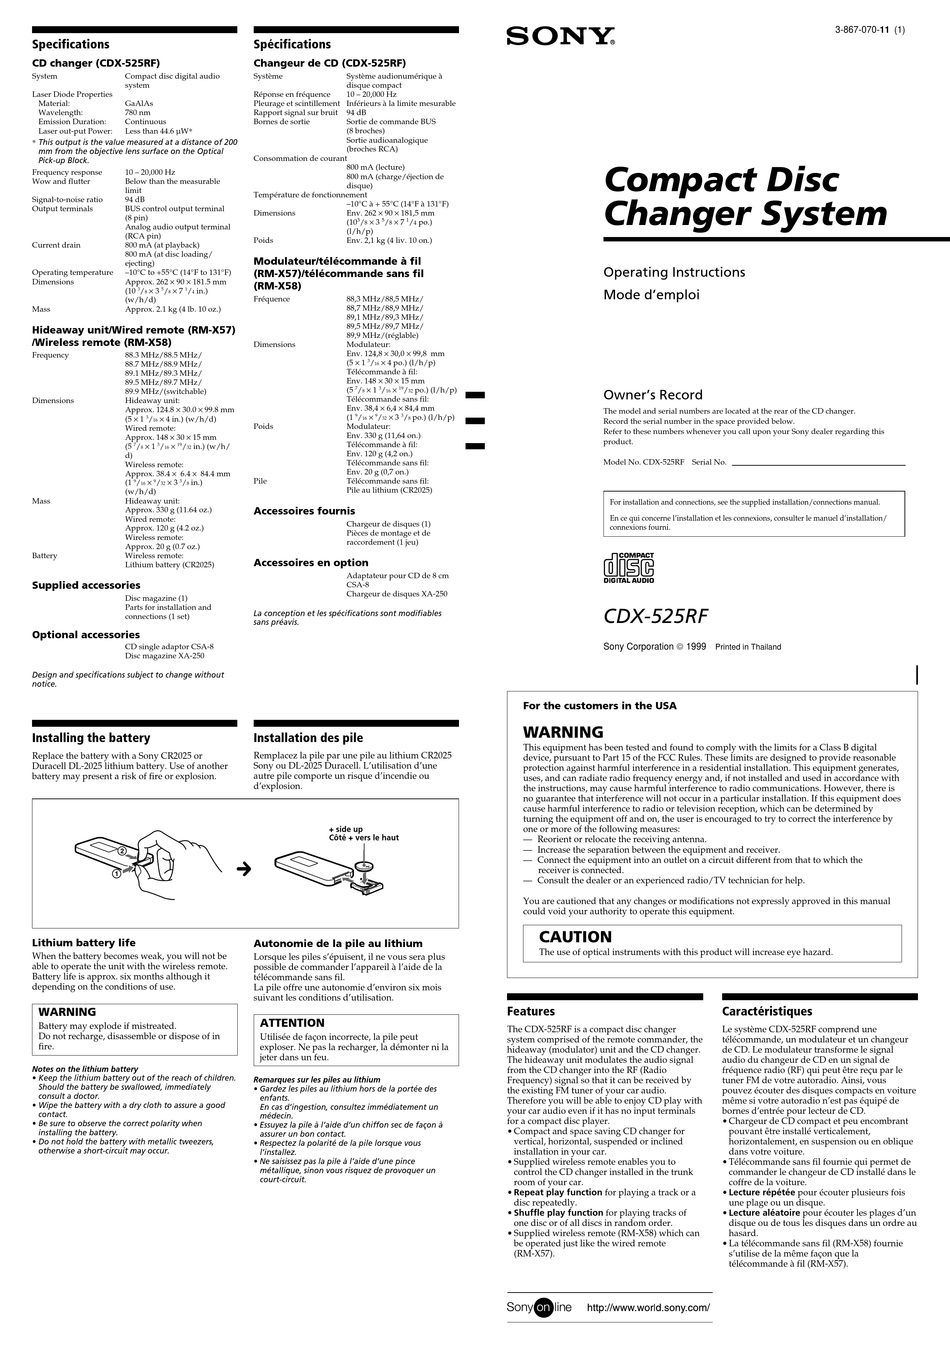 SONY CDX-525RF OPERATING INSTRUCTIONS (PRIMARY MANUAL) OPERATING ...